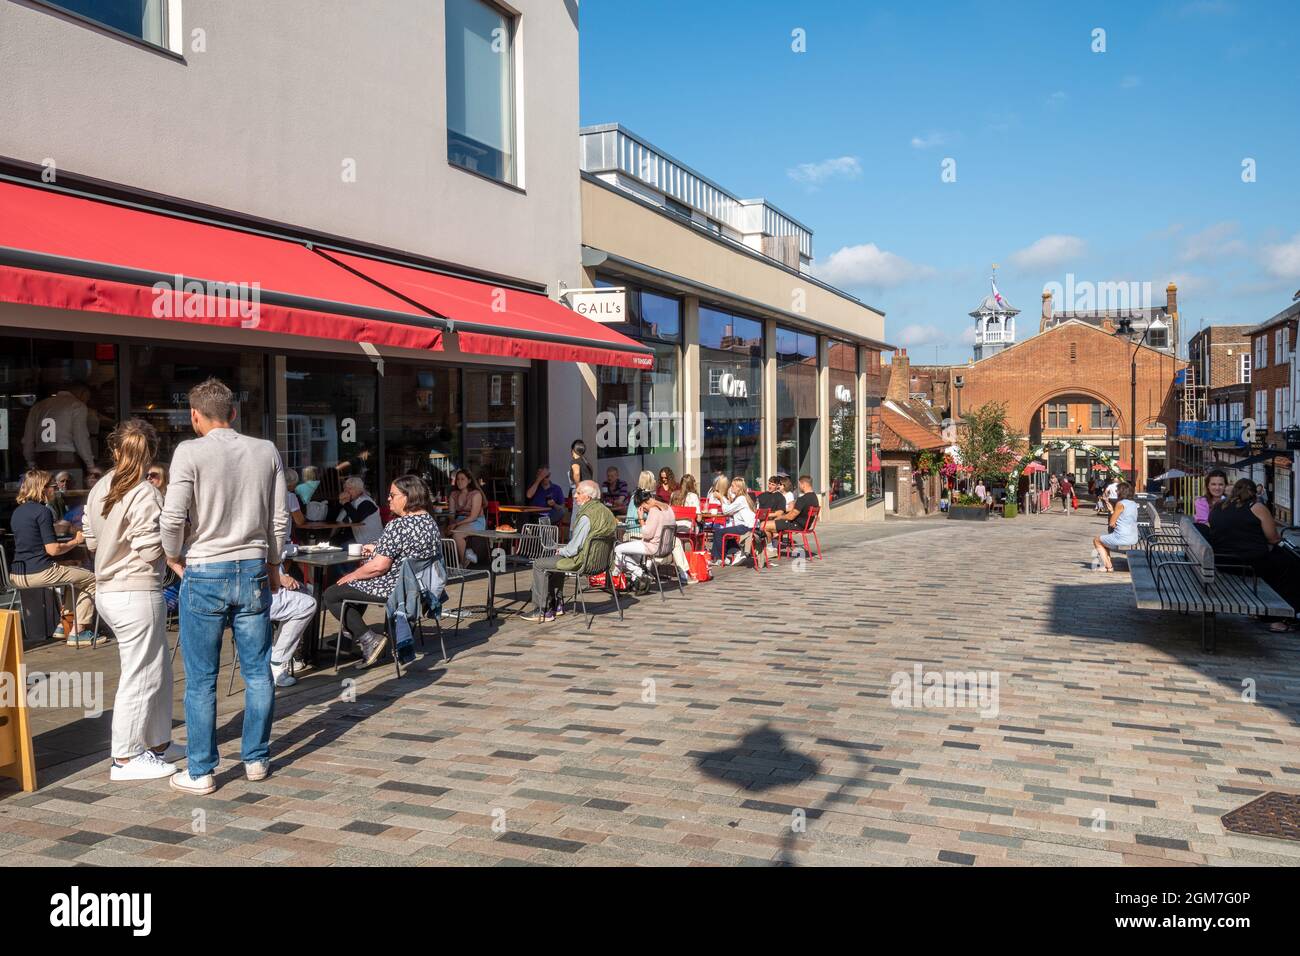 View of Tunsgate in Guildford town centre, busy with people eating and drinking outside cafes and bars on a sunny day, Surrey, UK Stock Photo